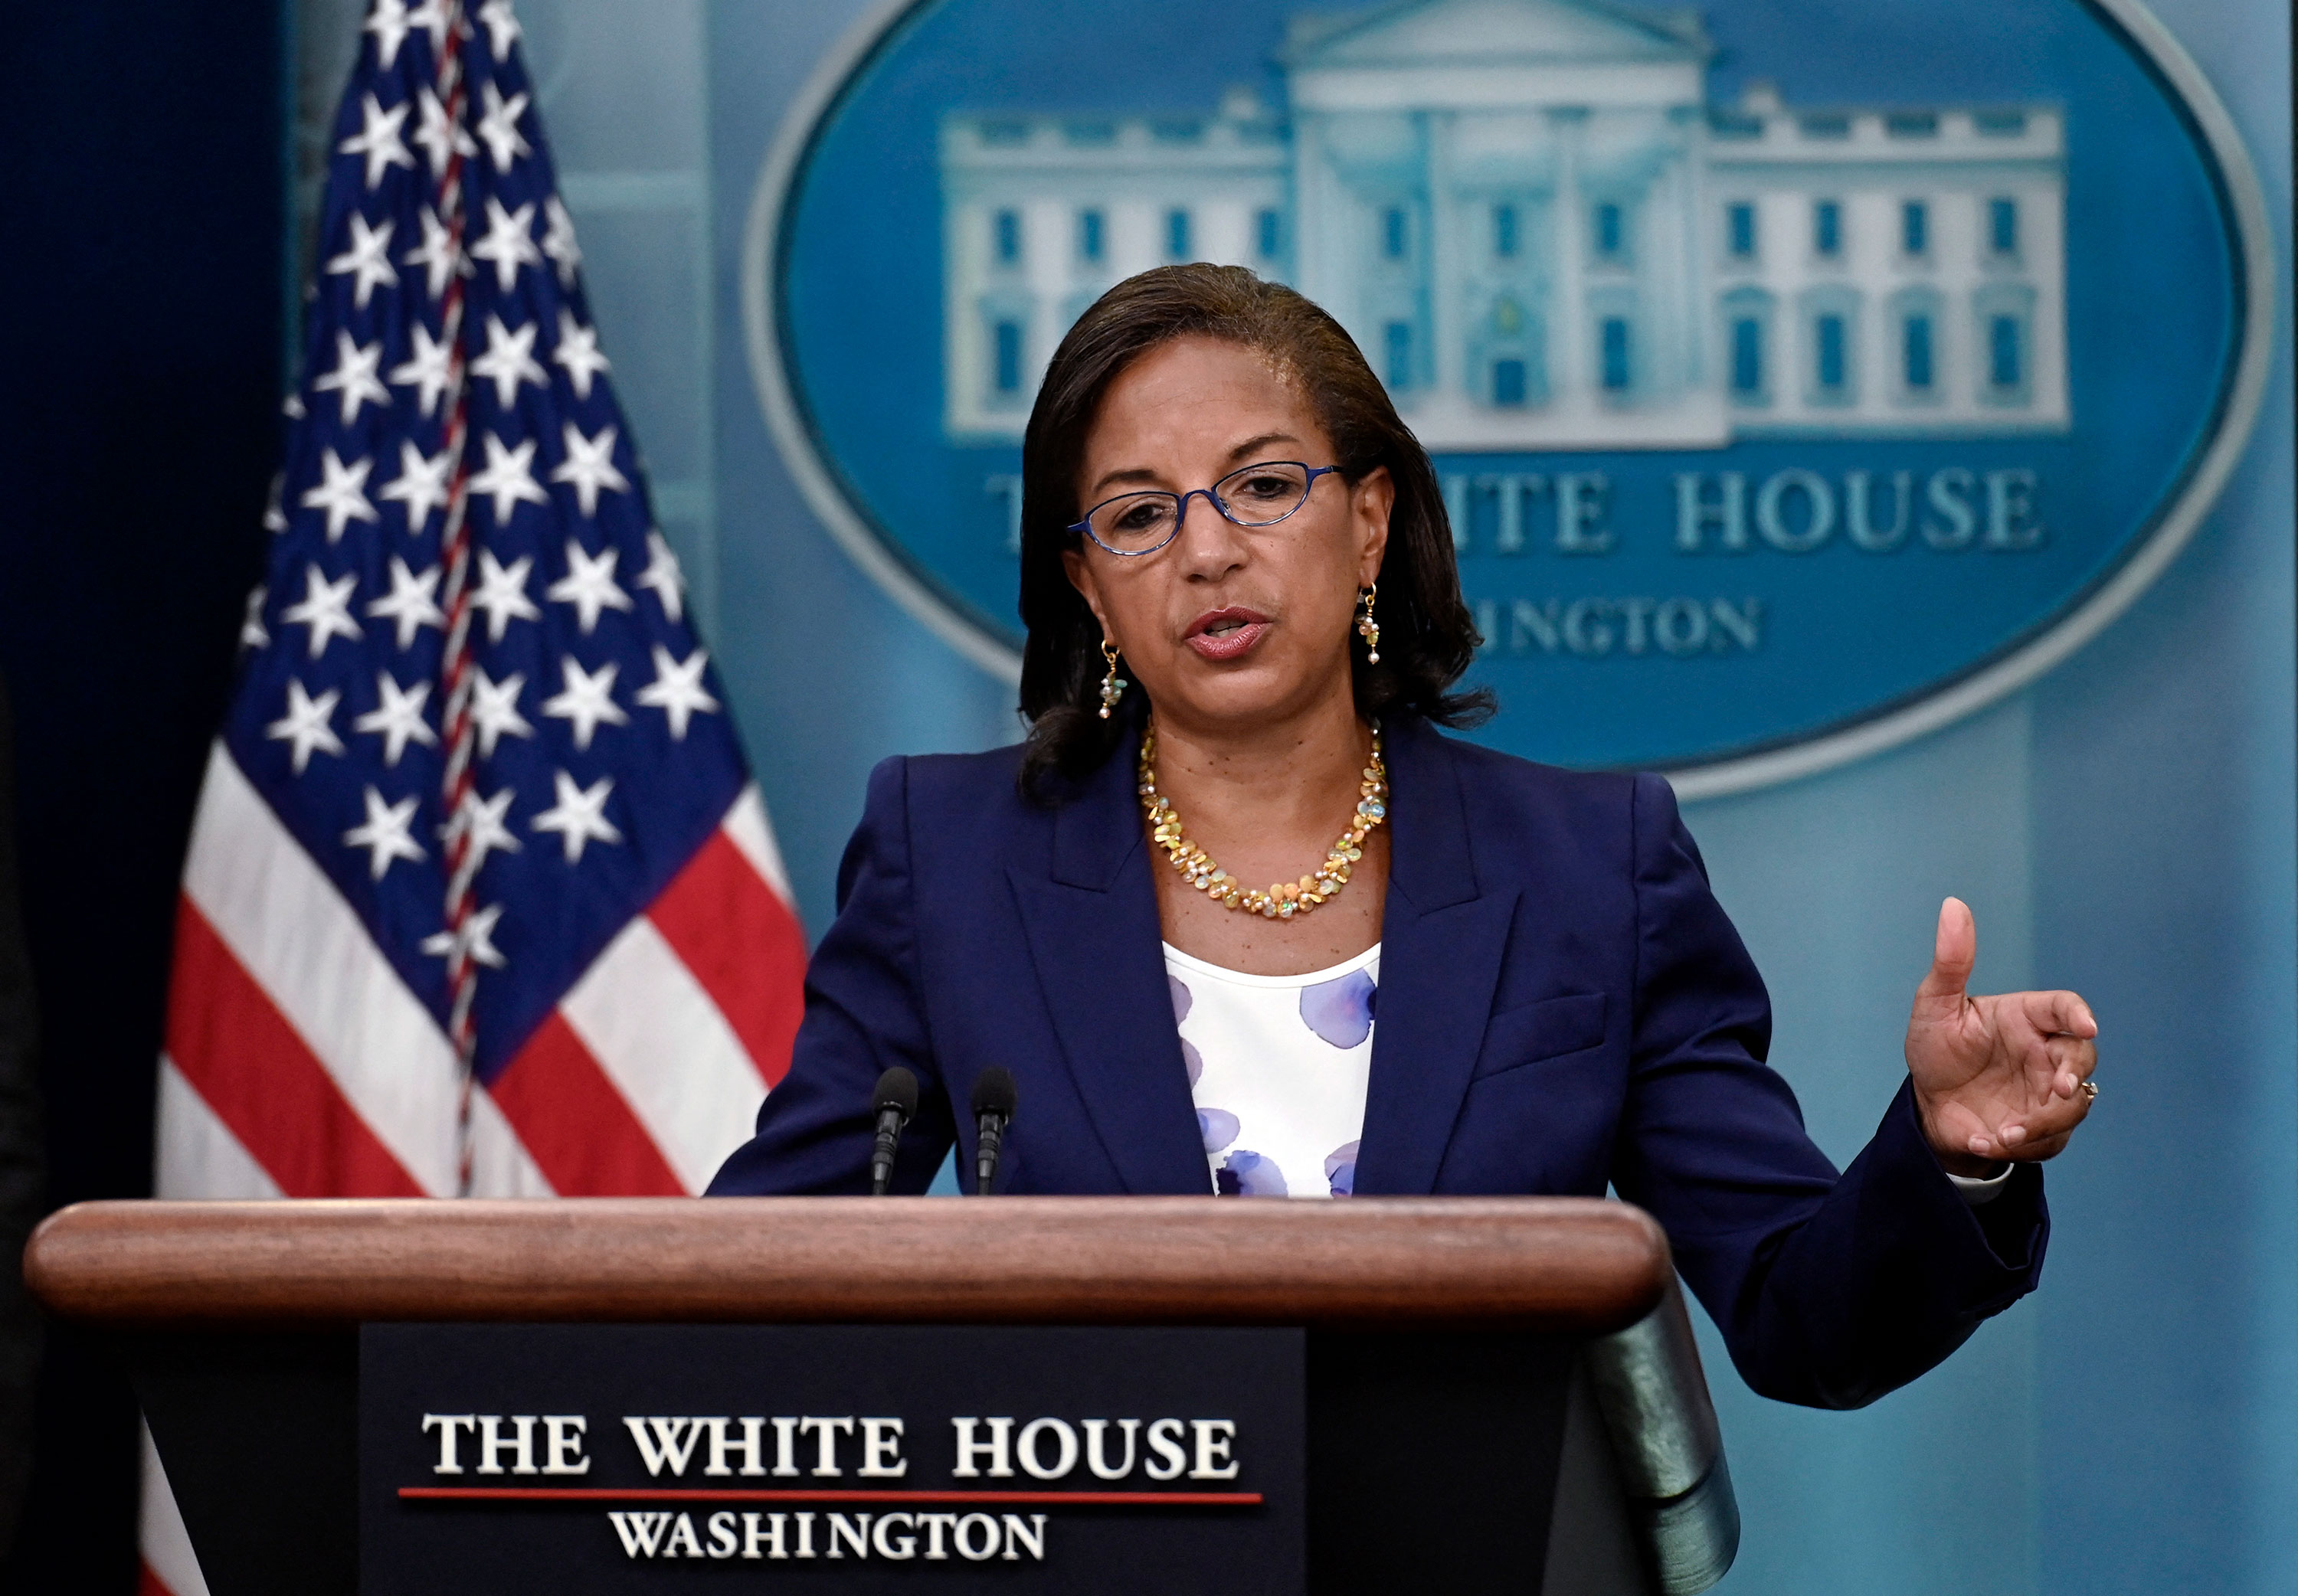 Susan Rice speaks during the daily press briefing at the White House in Washington, DC, on Wednesday.